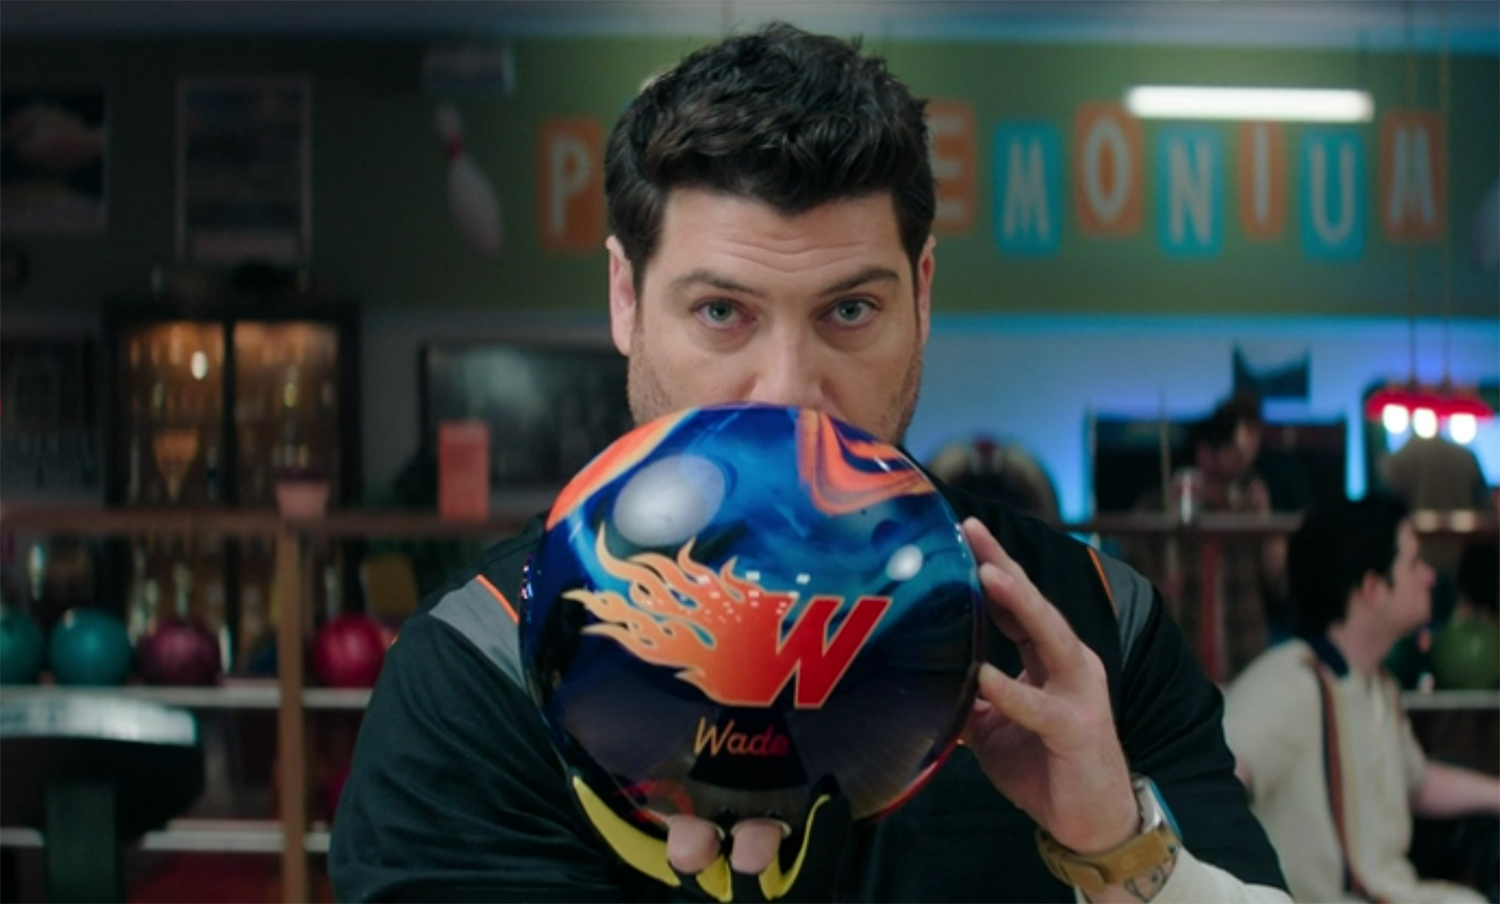 Adam Pally gets ready to bowl.